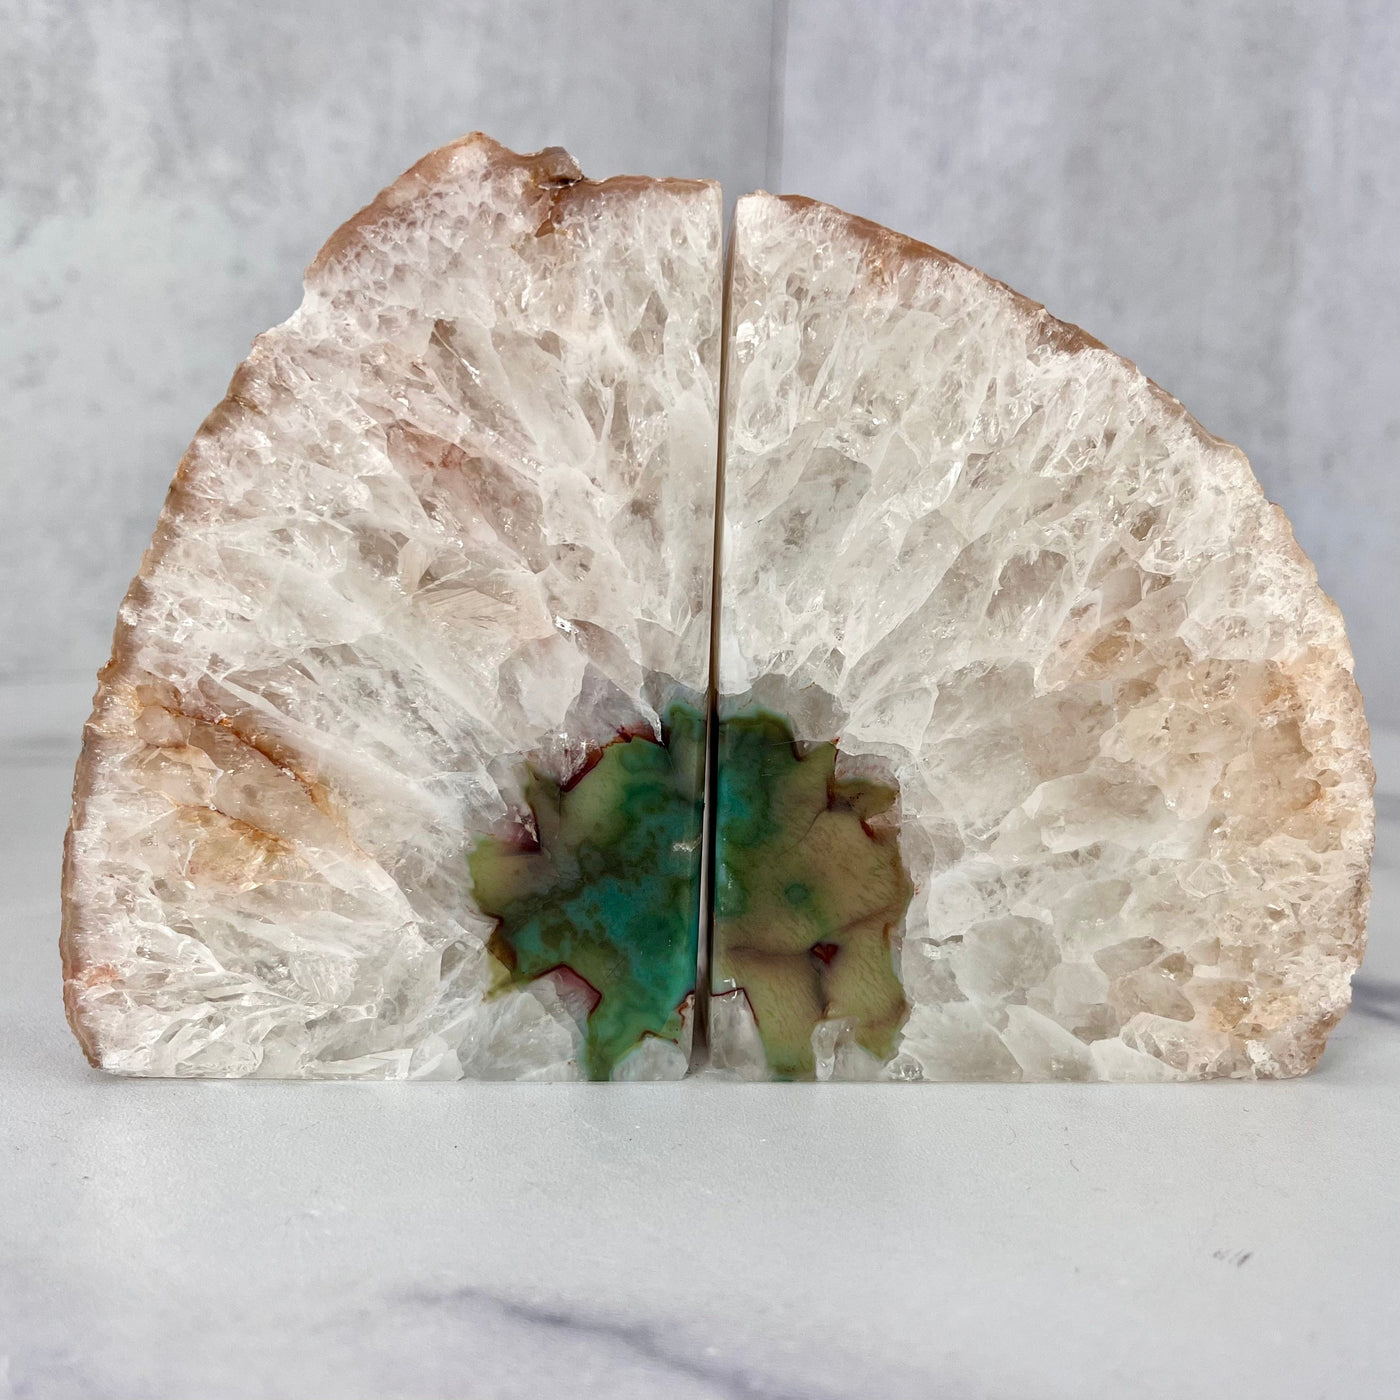 Agate Book End Pair - Dyed Green - 1 to 3 pounds (RK1-07)